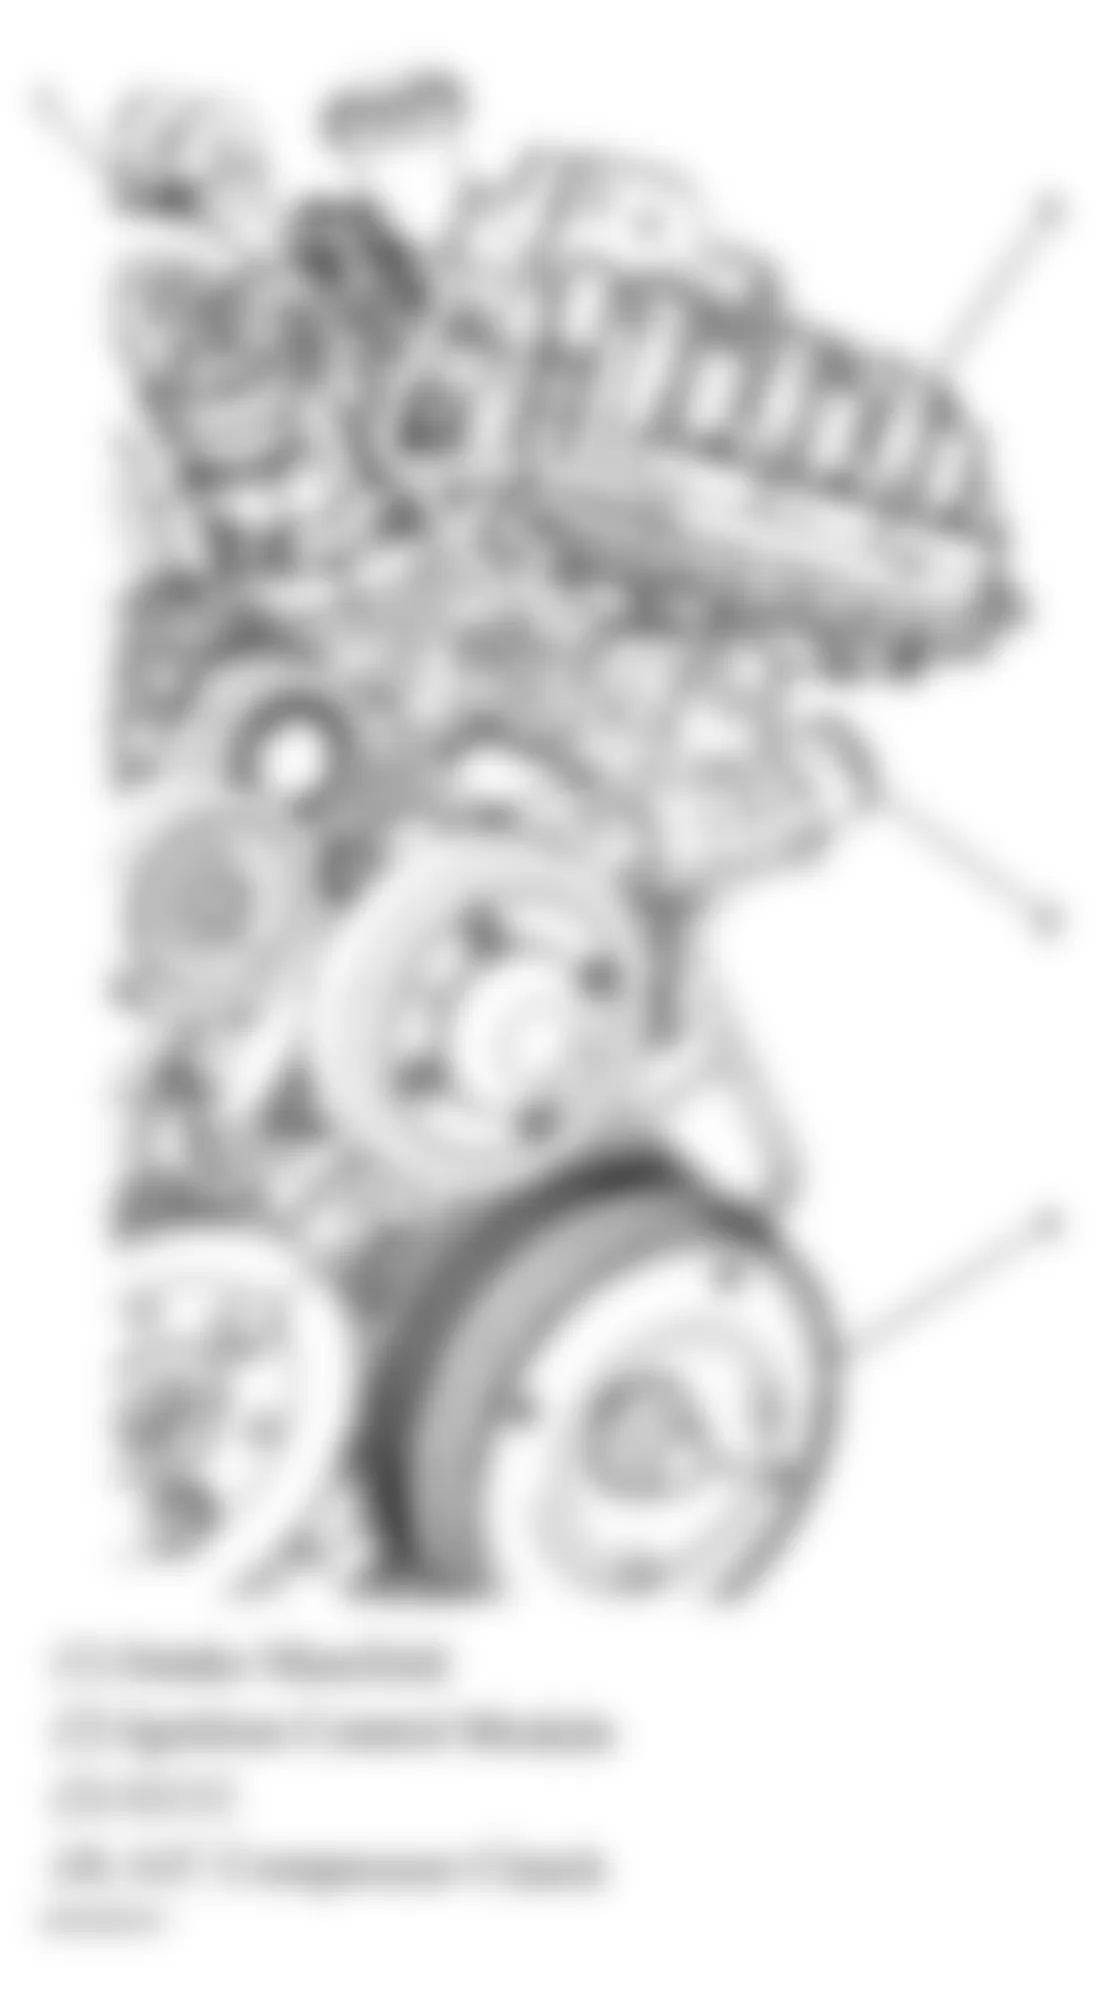 Buick LaCrosse CXS 2008 - Component Locations -  Front Of Engine (3.8L)